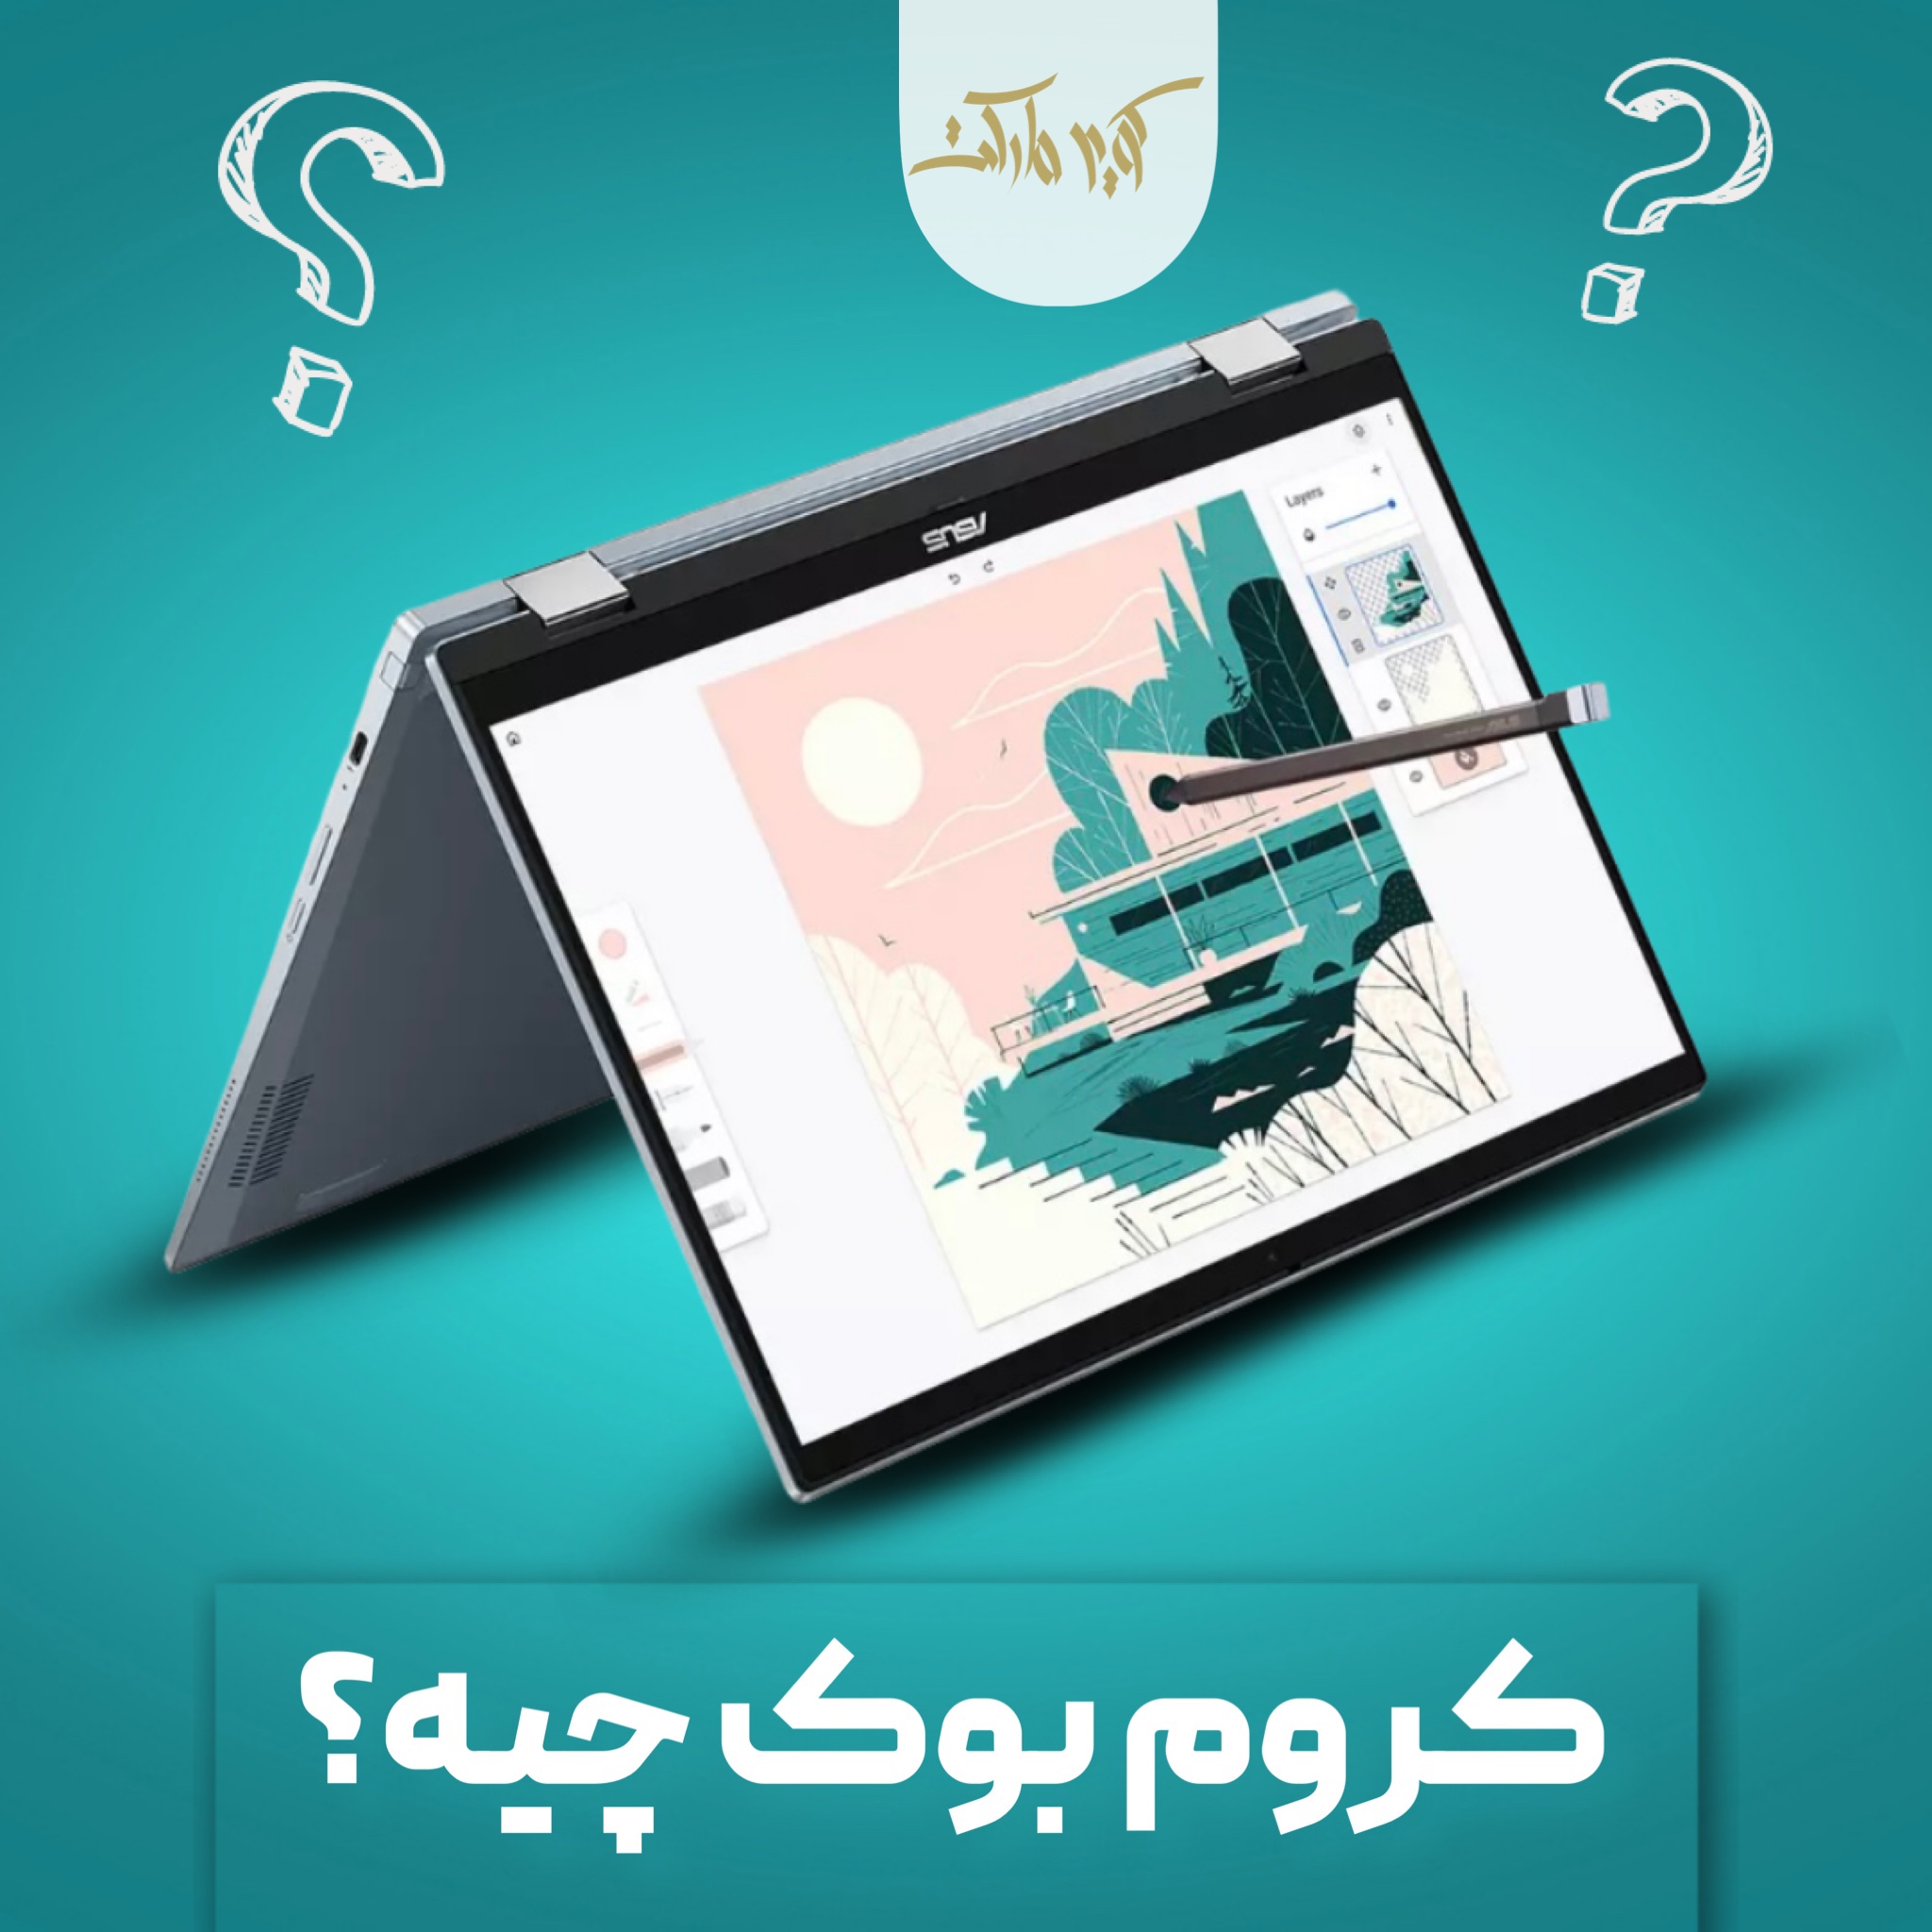 You are currently viewing کروم بوک چیست؟